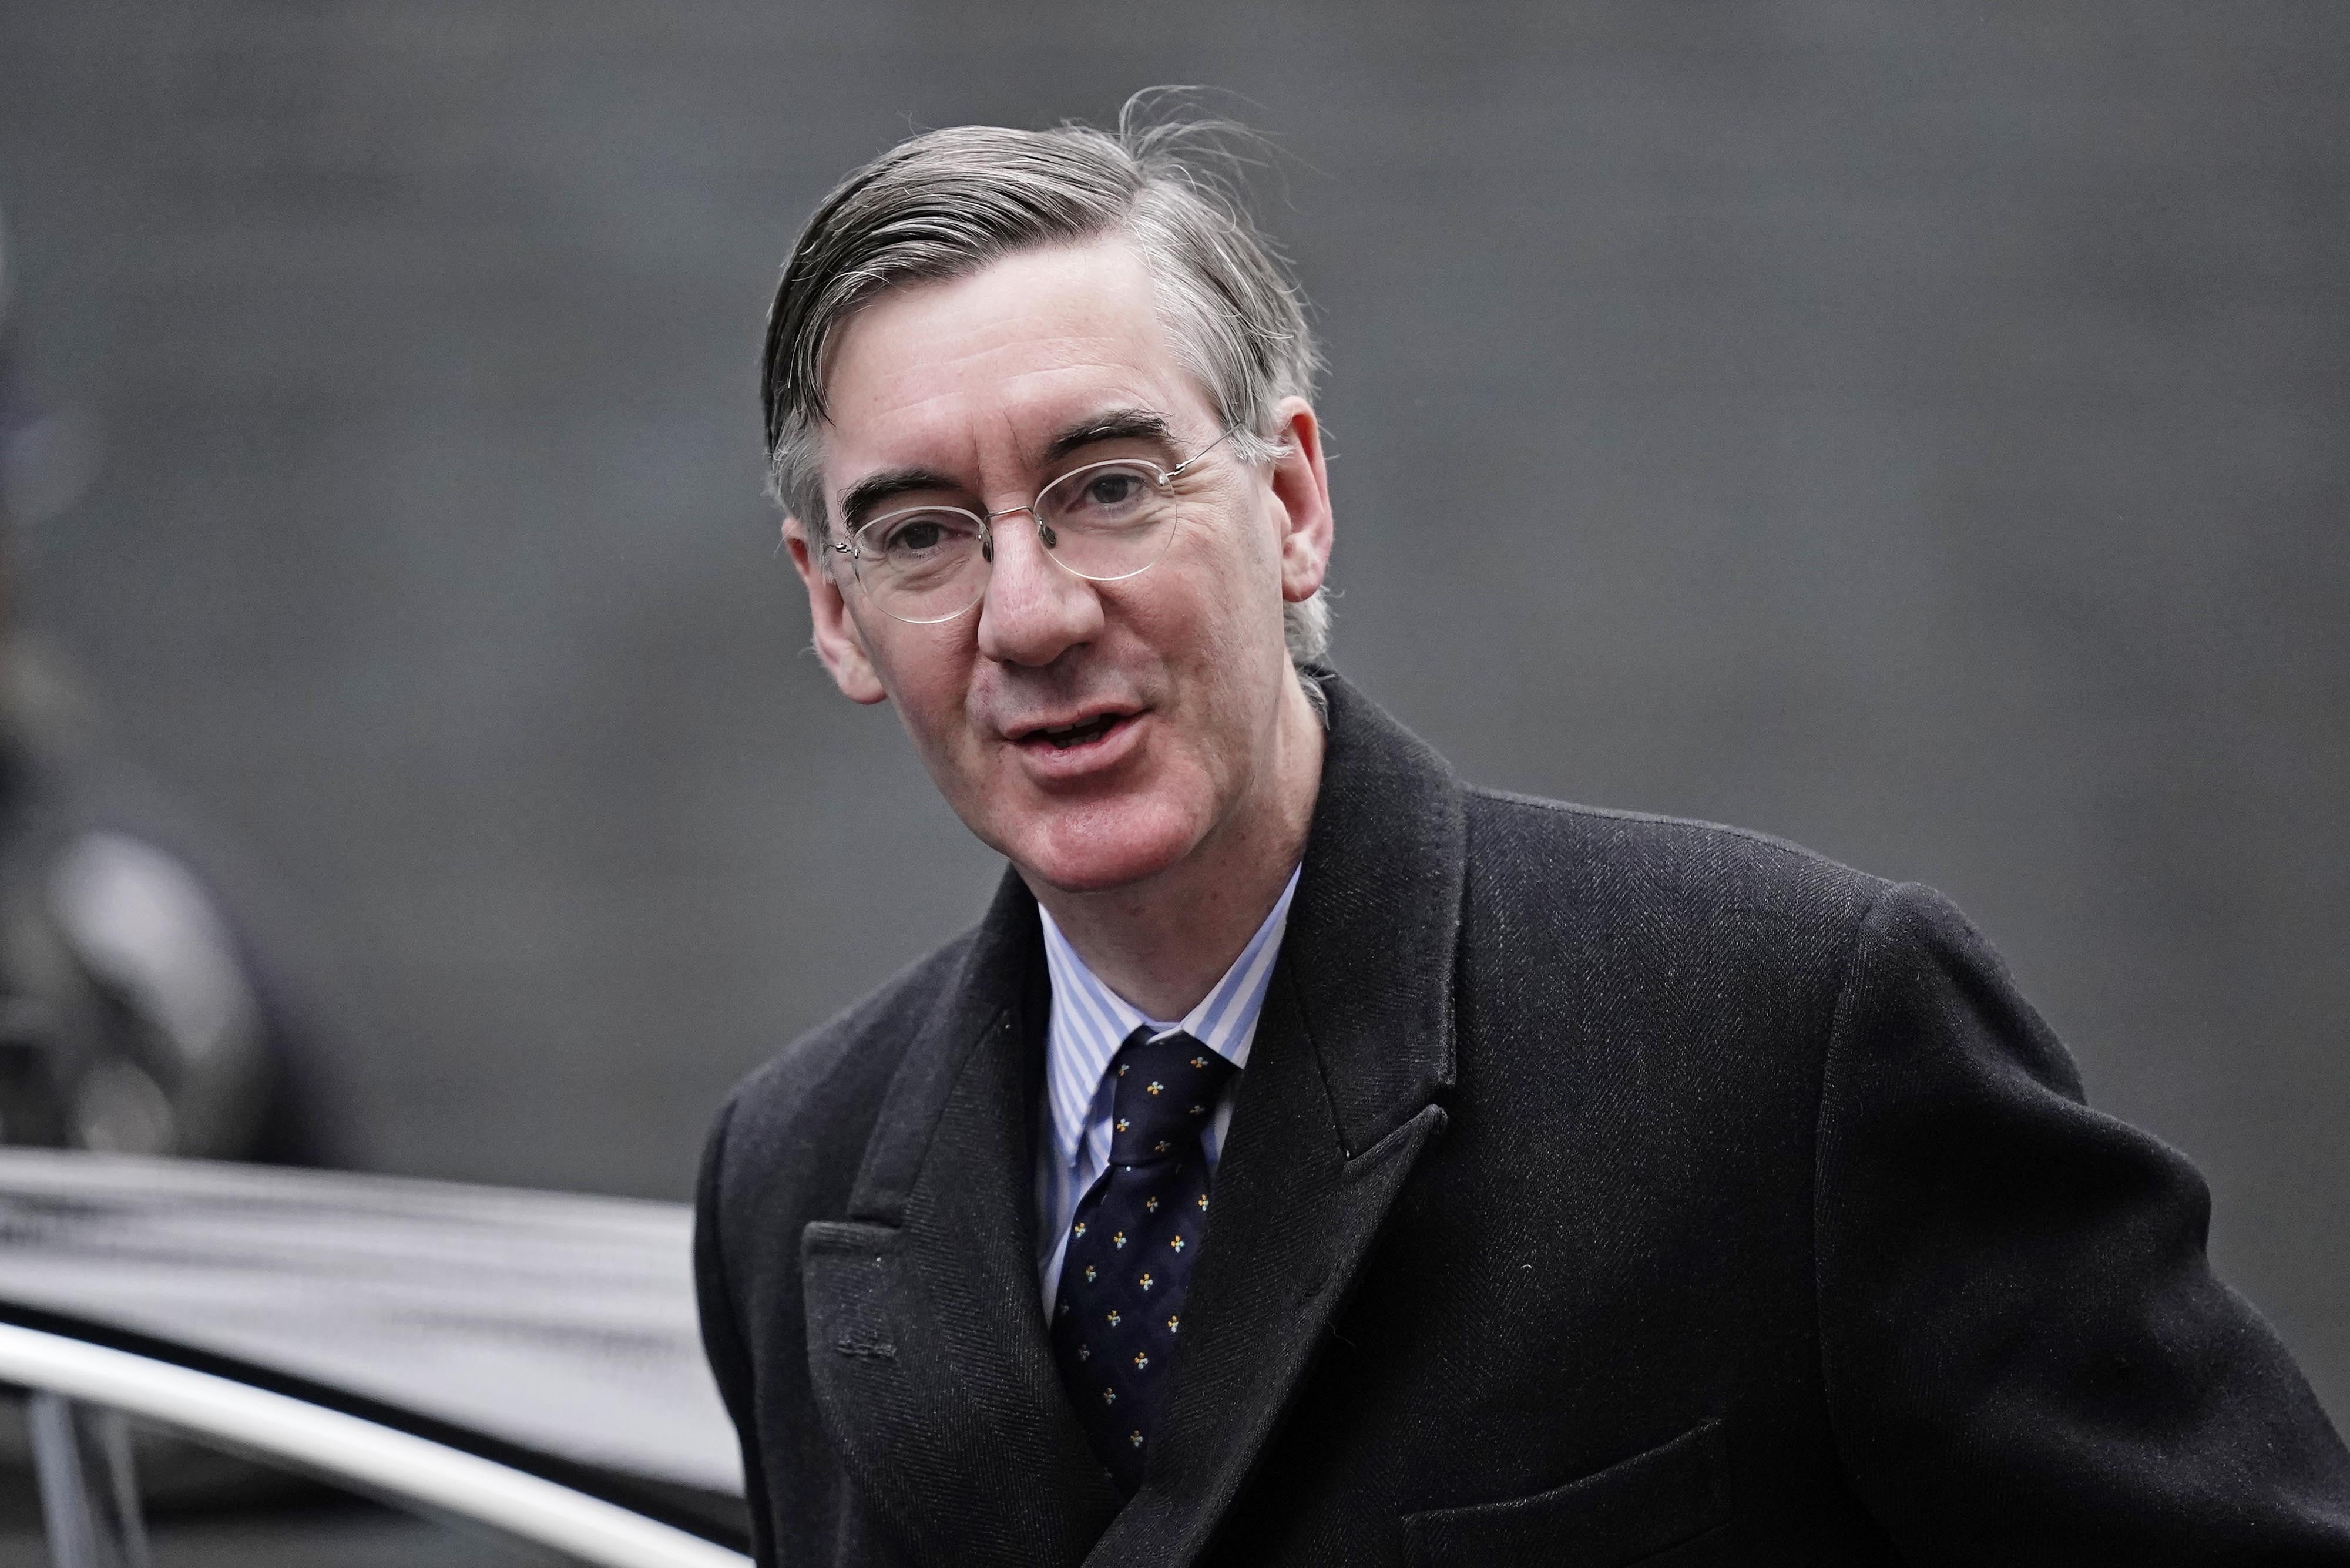 Jacob Rees-Mogg thanked the commissioner for